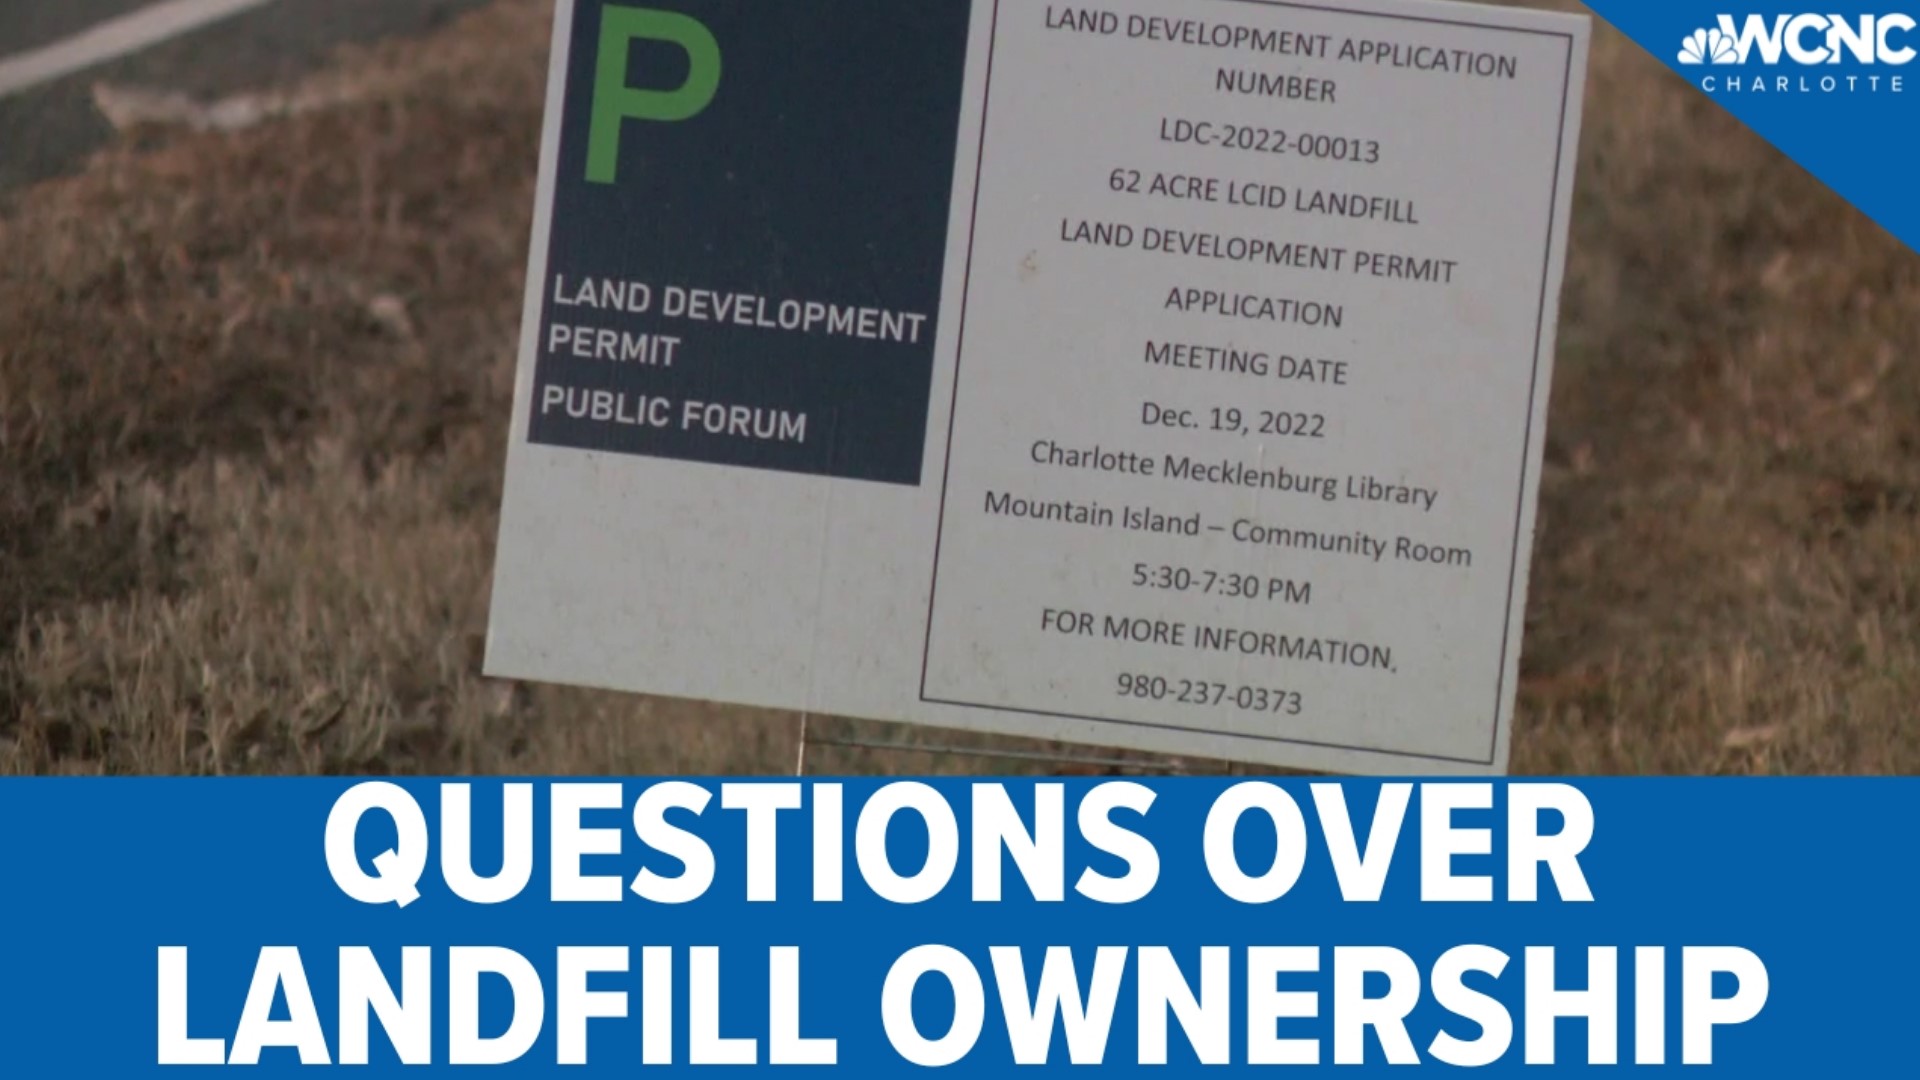 Profits over people – that’s how a Charlotte city councilmember is describing the decision to put a landfill on Kelly Road, which is surrounded by dozens of homes.